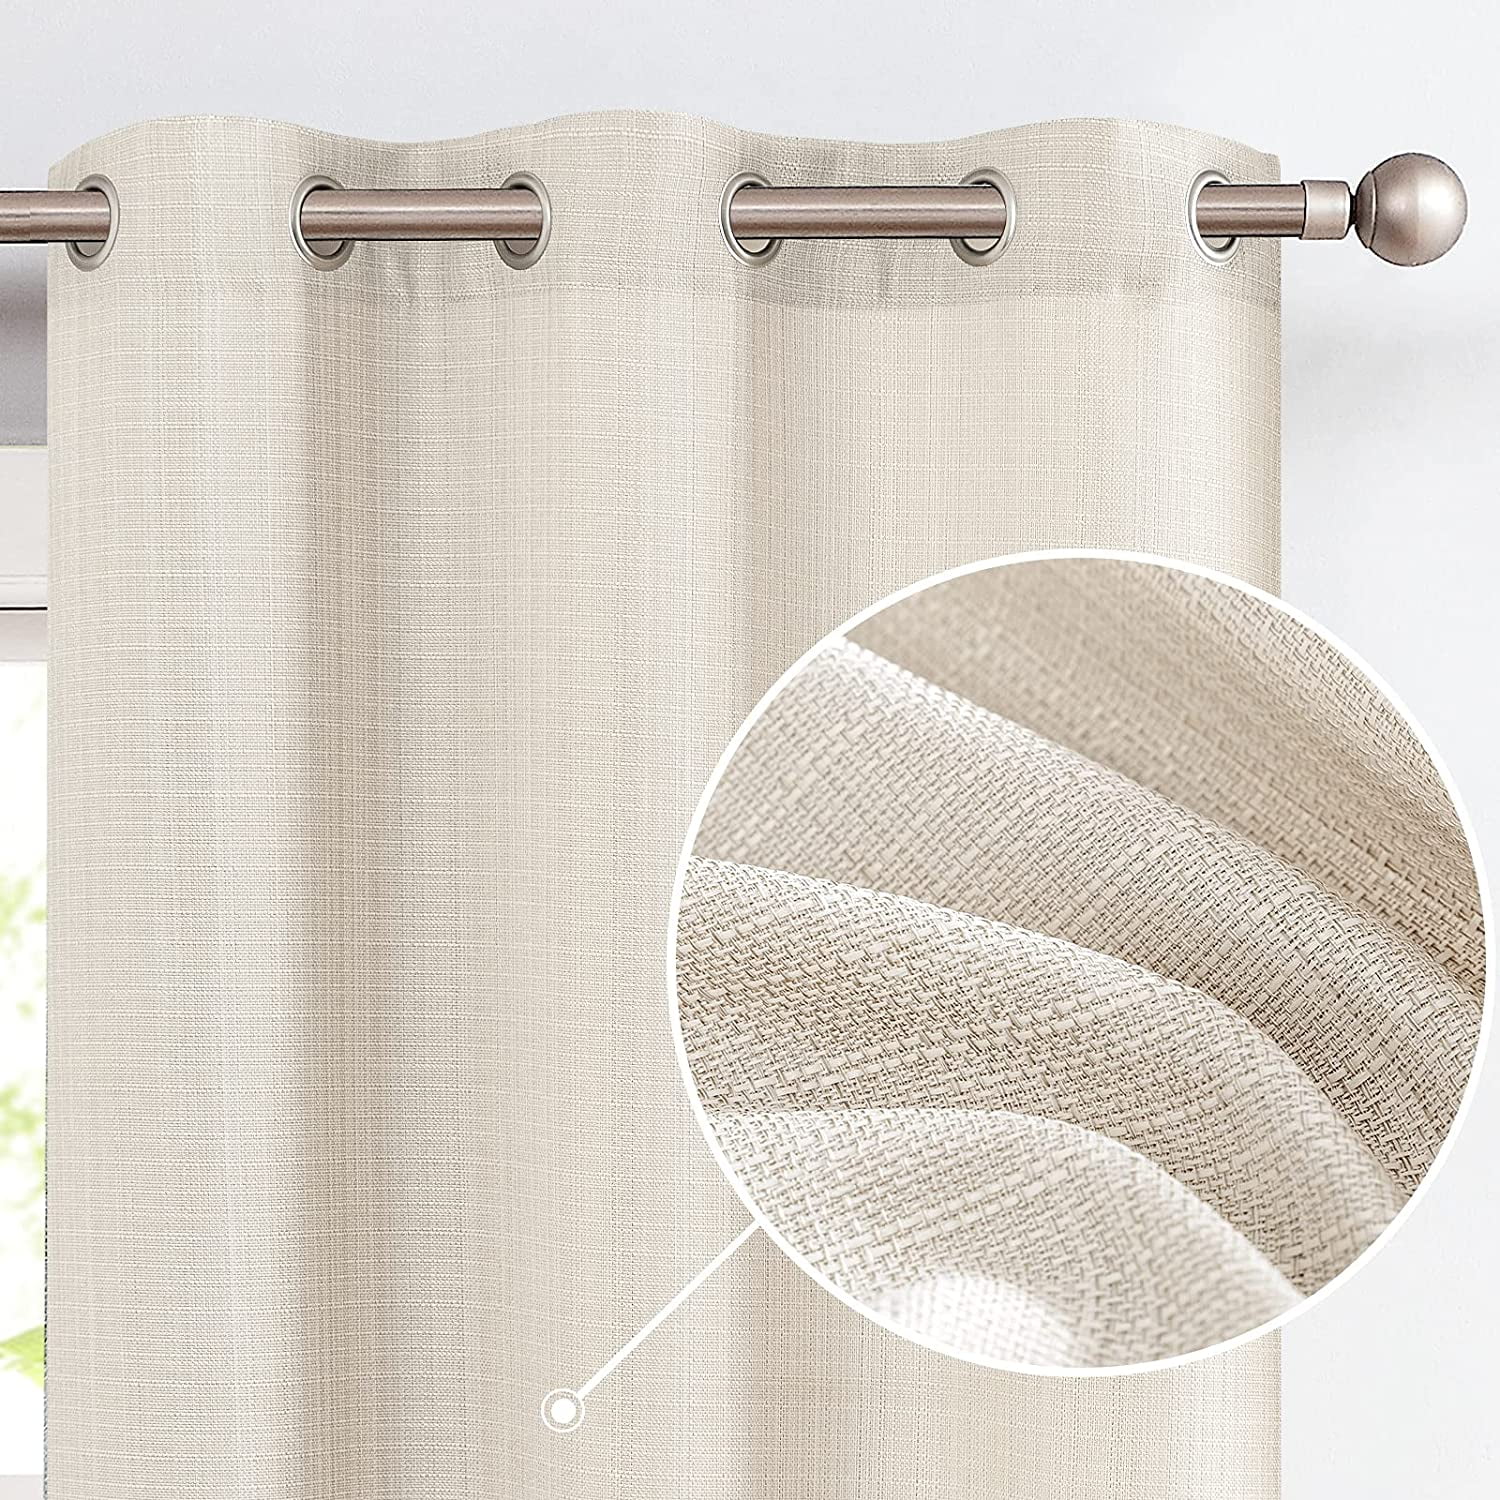 jinchan Linen Texture Curtains Light Reducing Grommet Top Drapes for Bedroom Living Room Window 2 Panels 95 Inches Length Greyish Beige